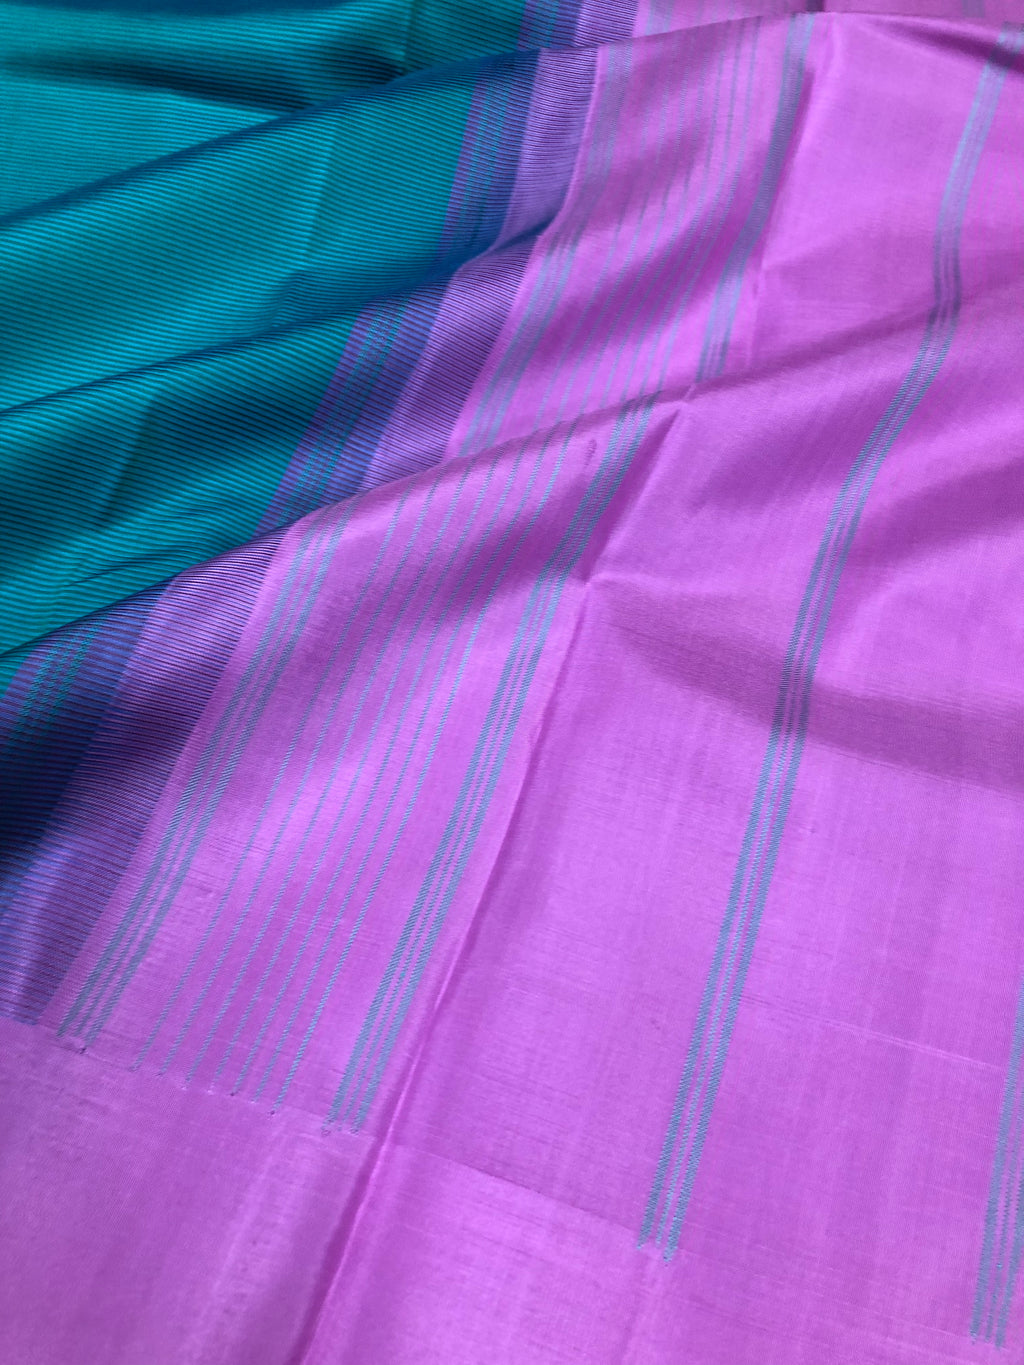 Diwaly Vibes on Korvai Kanchivaram - teal blue and bubble gum pink